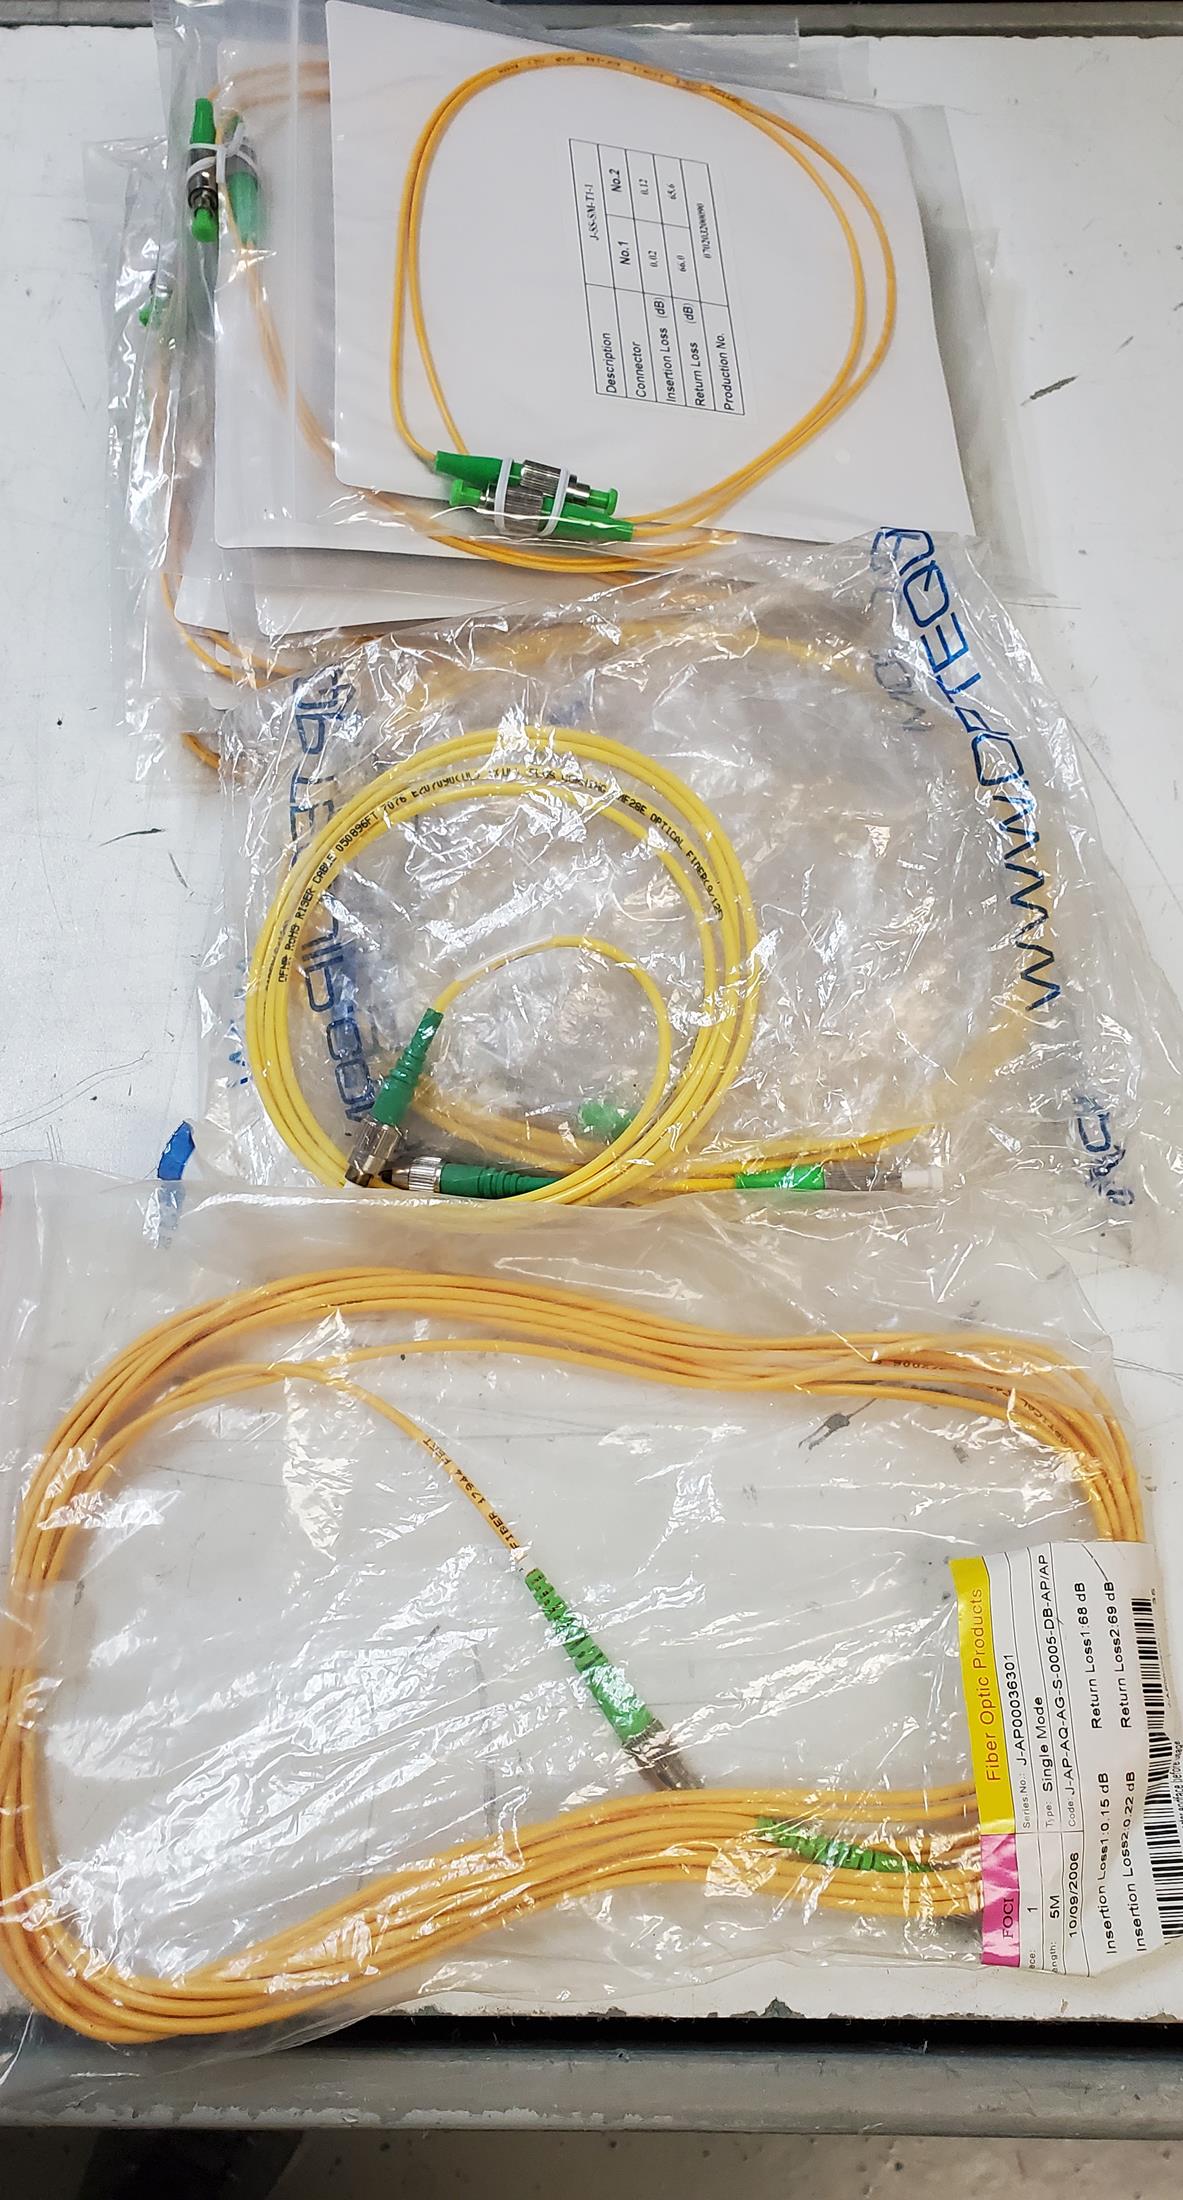 Similar product is AccuSource FC/APC patchcords